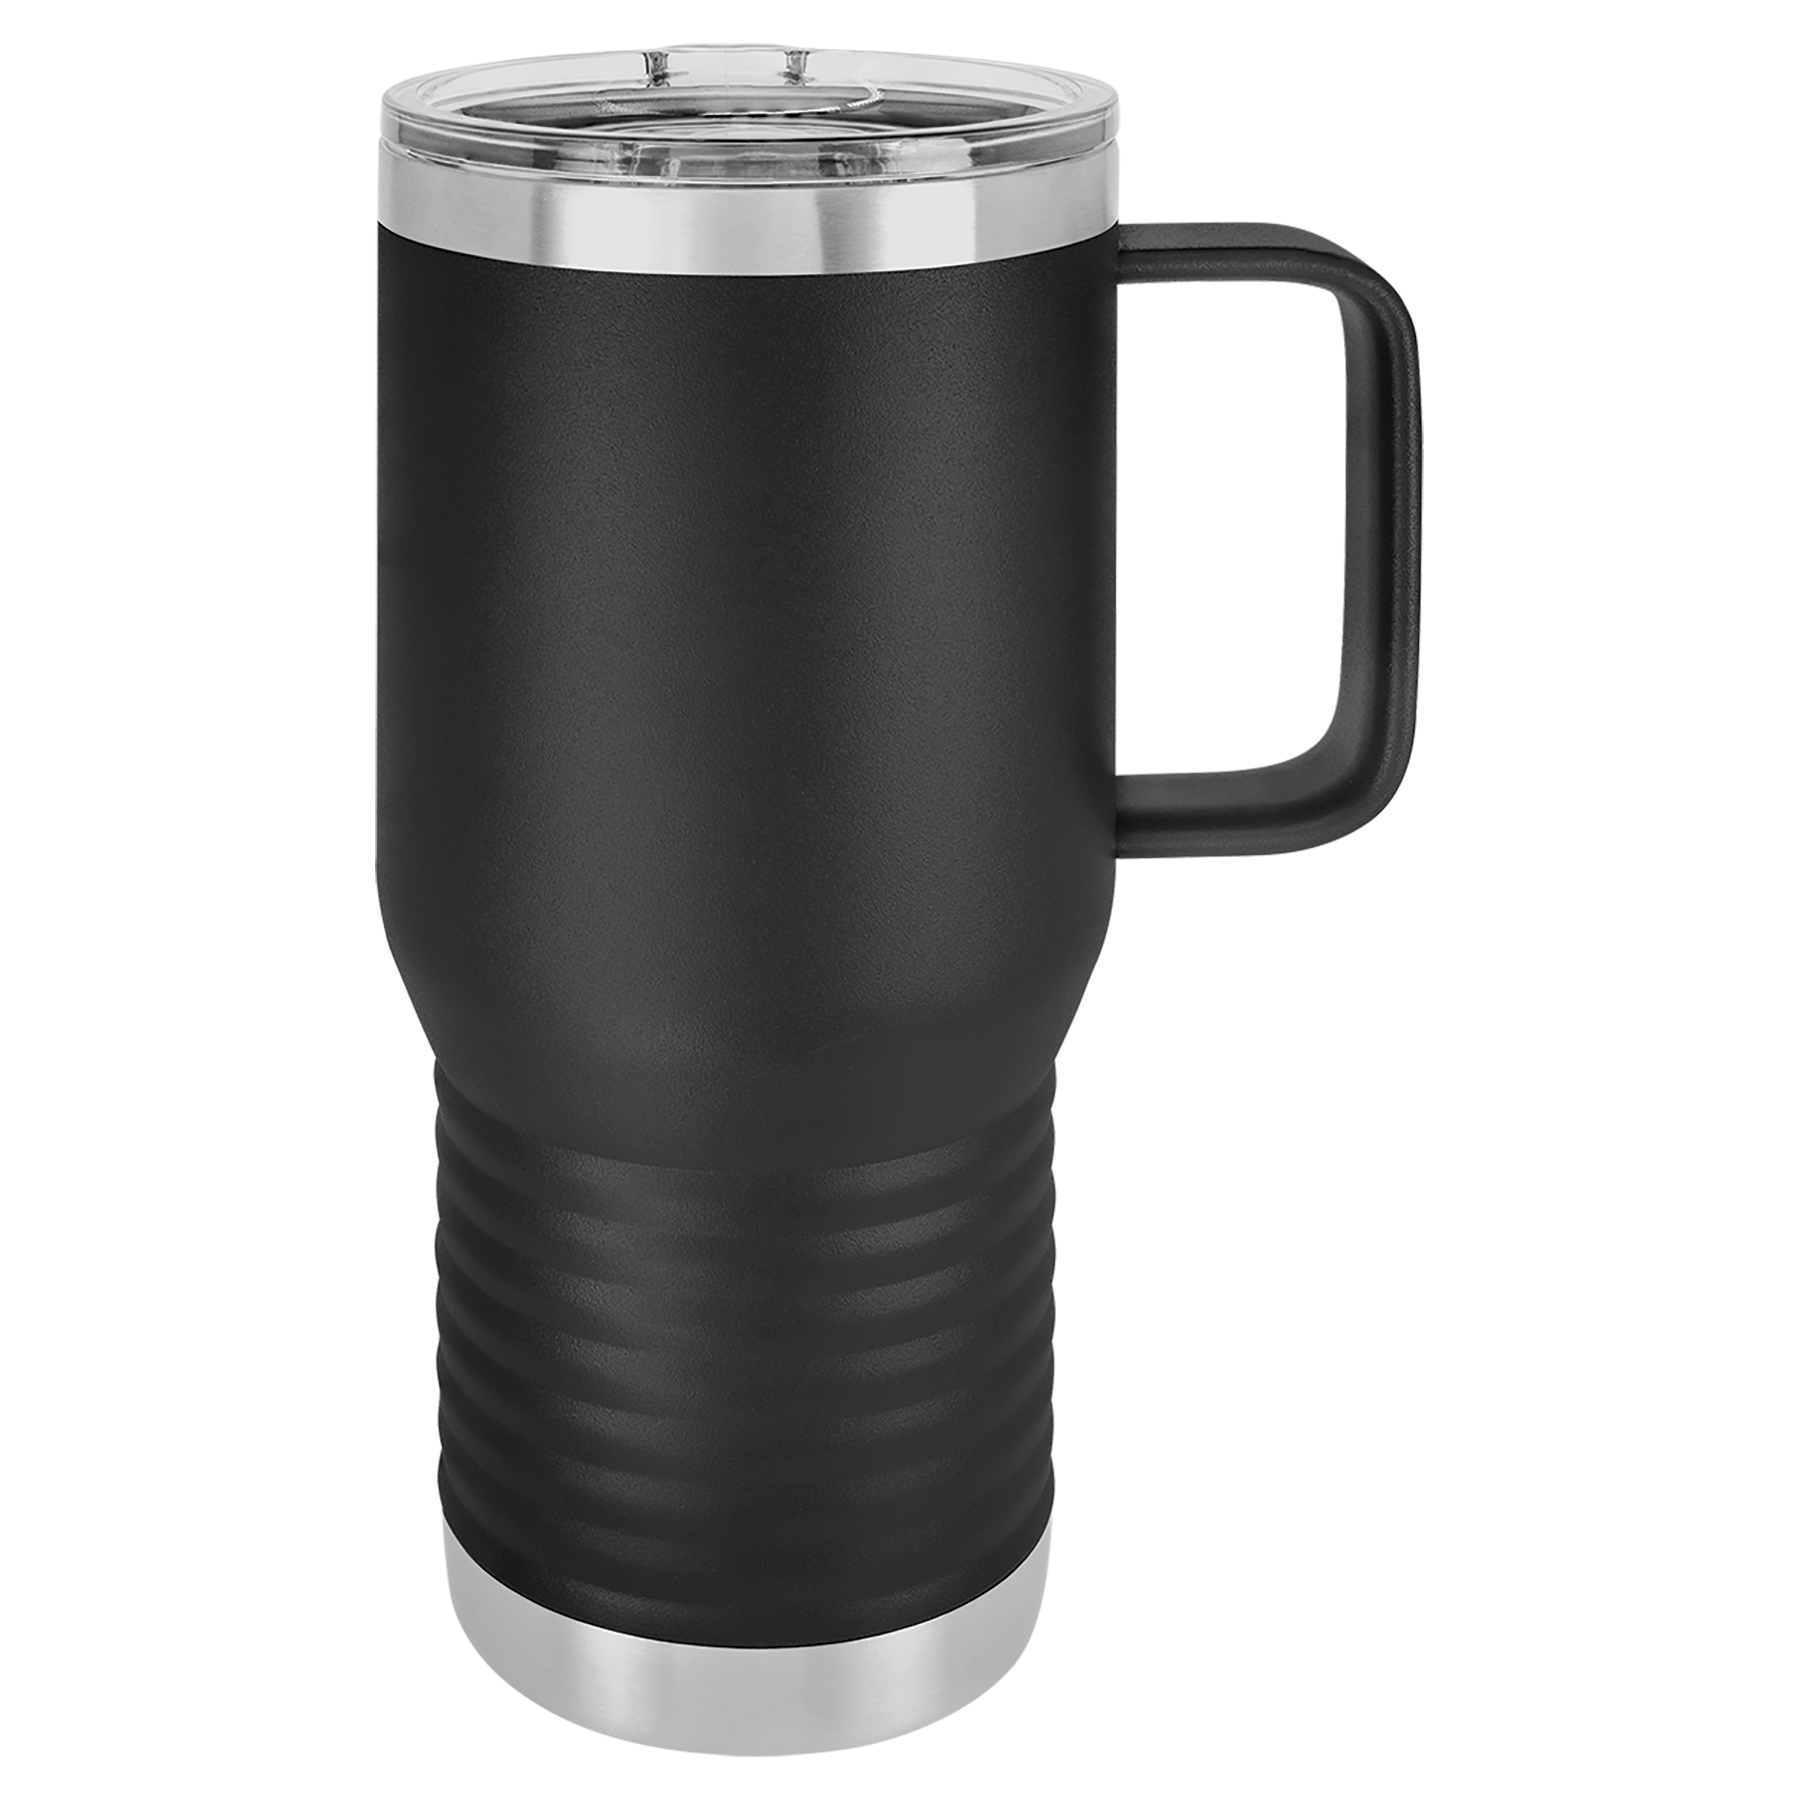 Black 20oz Travel Mug -One Free Engraving -Fits most Cup Holders -Double-wall Vacuum Insulated -Made from 18/8 Gauge Stainless Steel (Type 304 Food Grade) -Lid is BPA Free (Hand Wash Only) -Not recommended for Dishwasher -Works with Cold and Hot Drinks -18 Color Options -Perfect for Personalized Gifts, Awards, Incentives, Swag & Fundraisers